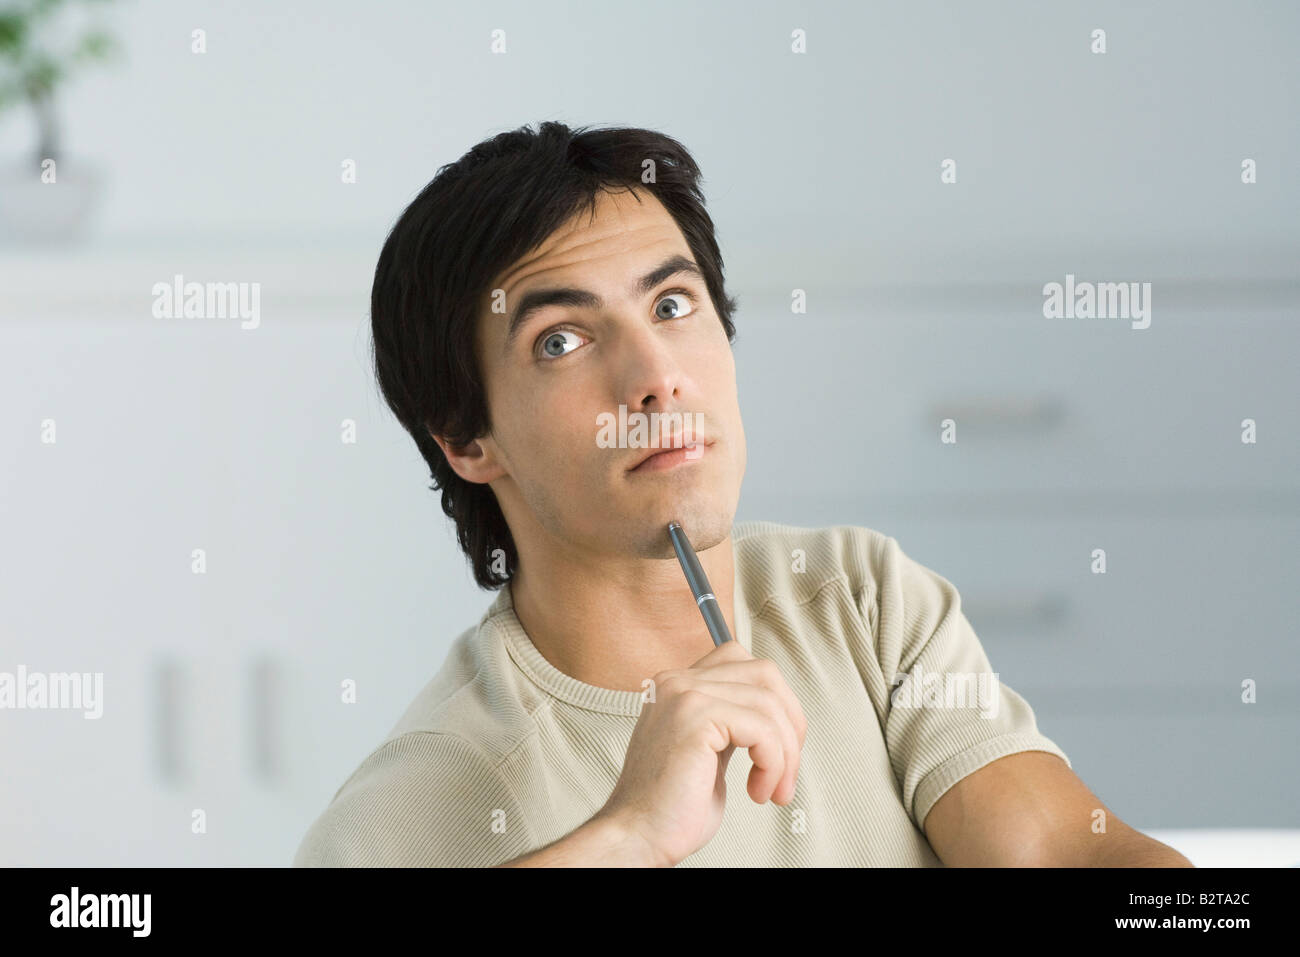 Man looking up, holding pen to his chin, raising eyebrows Stock Photo